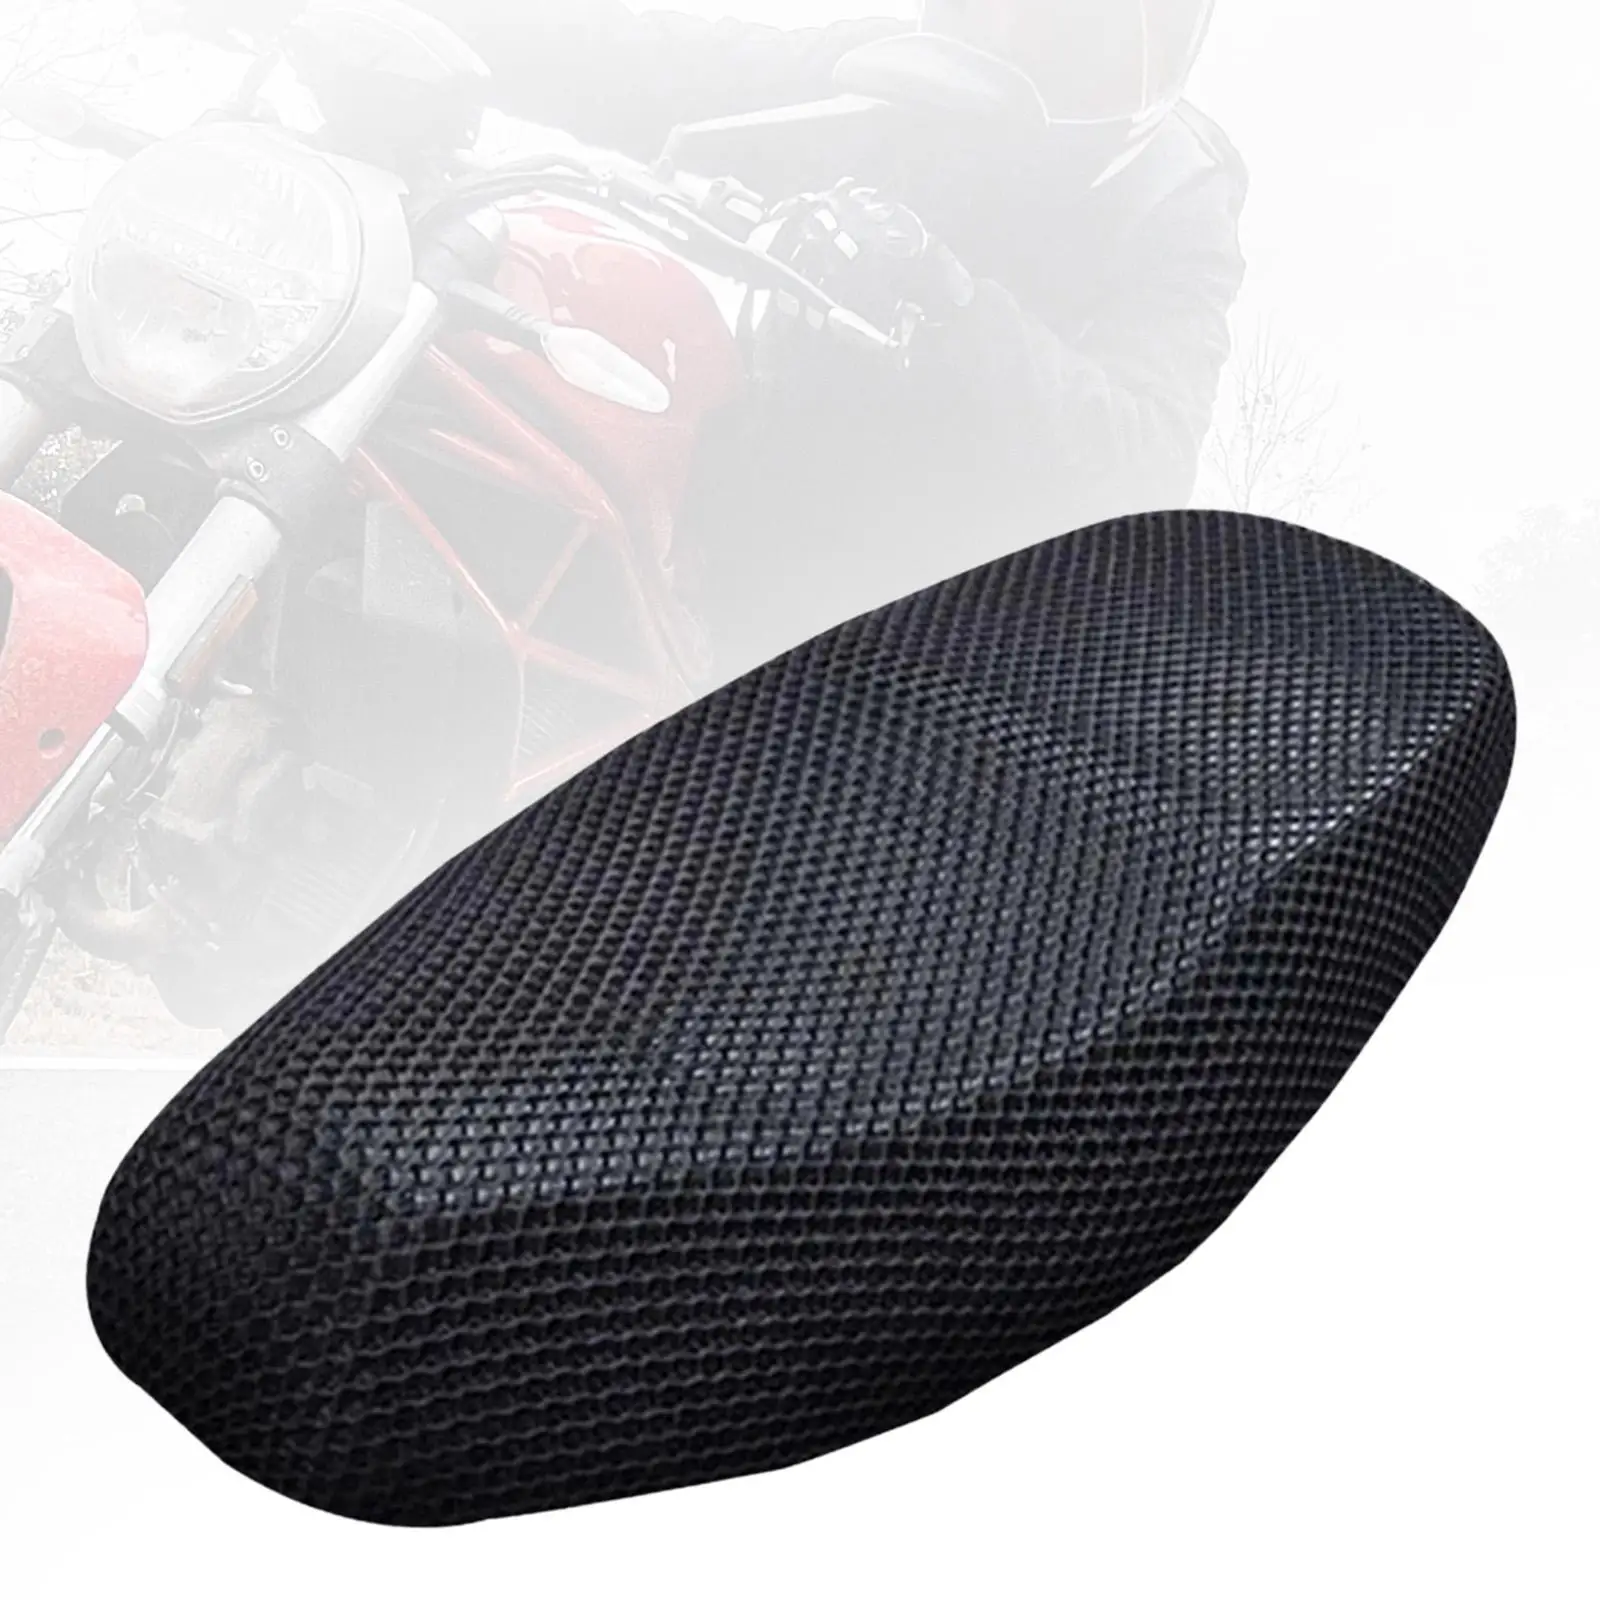 Motorcycle Seat Mesh Cover Anti Slip 3D Thicken Motorbike Seat Cushion Cover